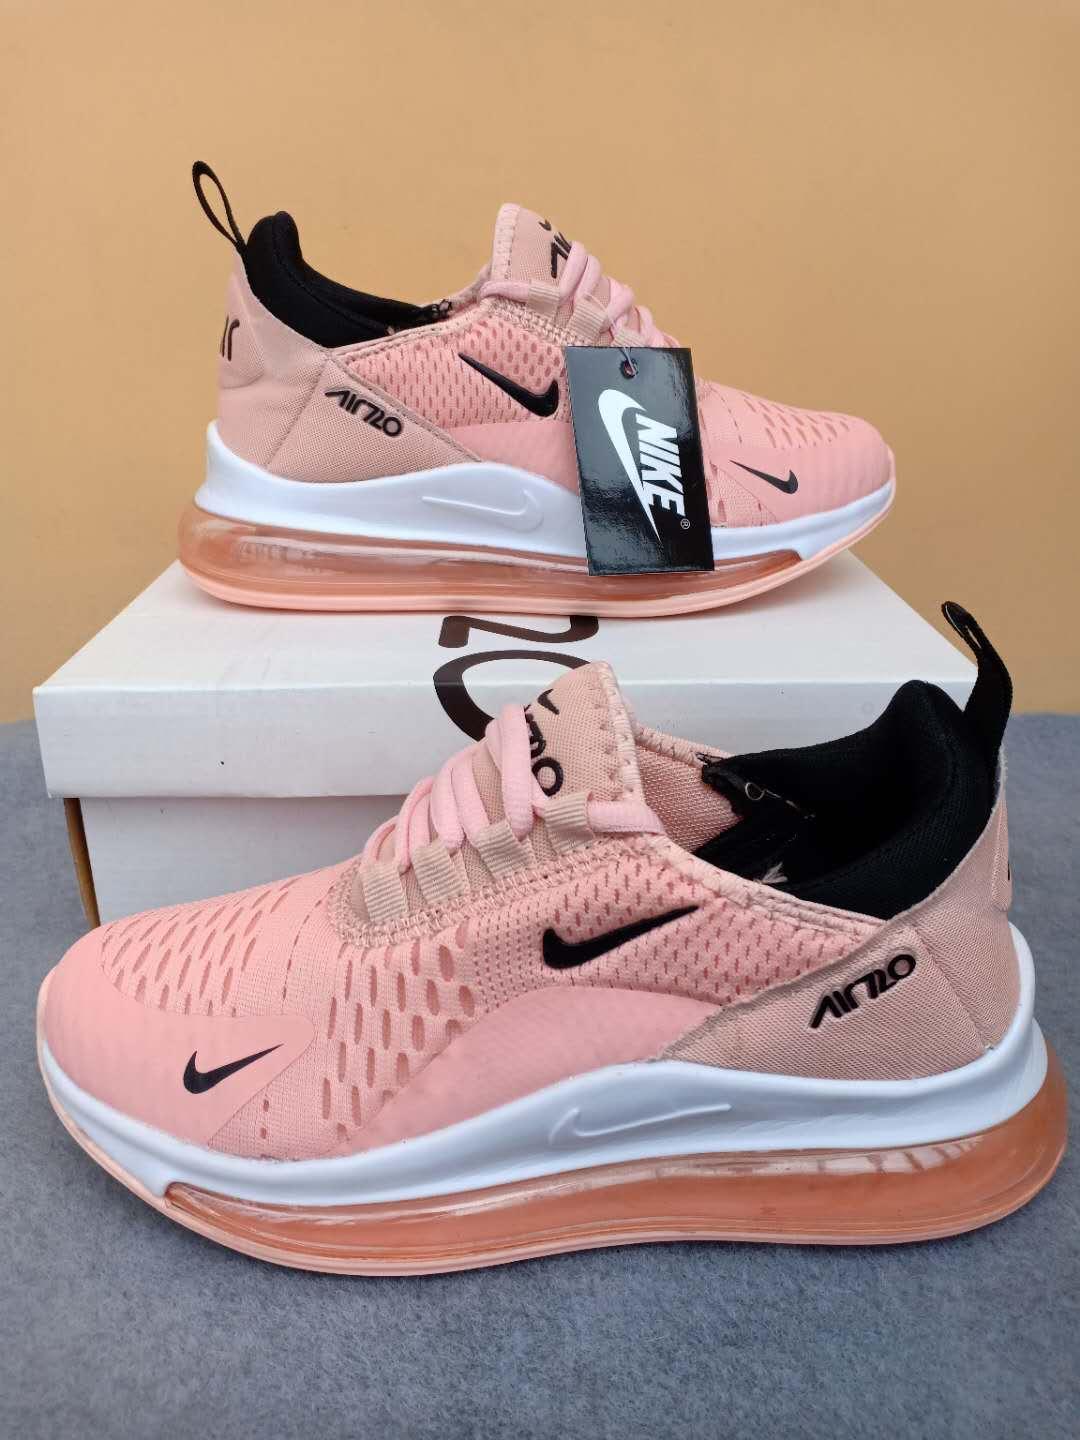 NikeAir Max 720 Flyknit womens shoes 